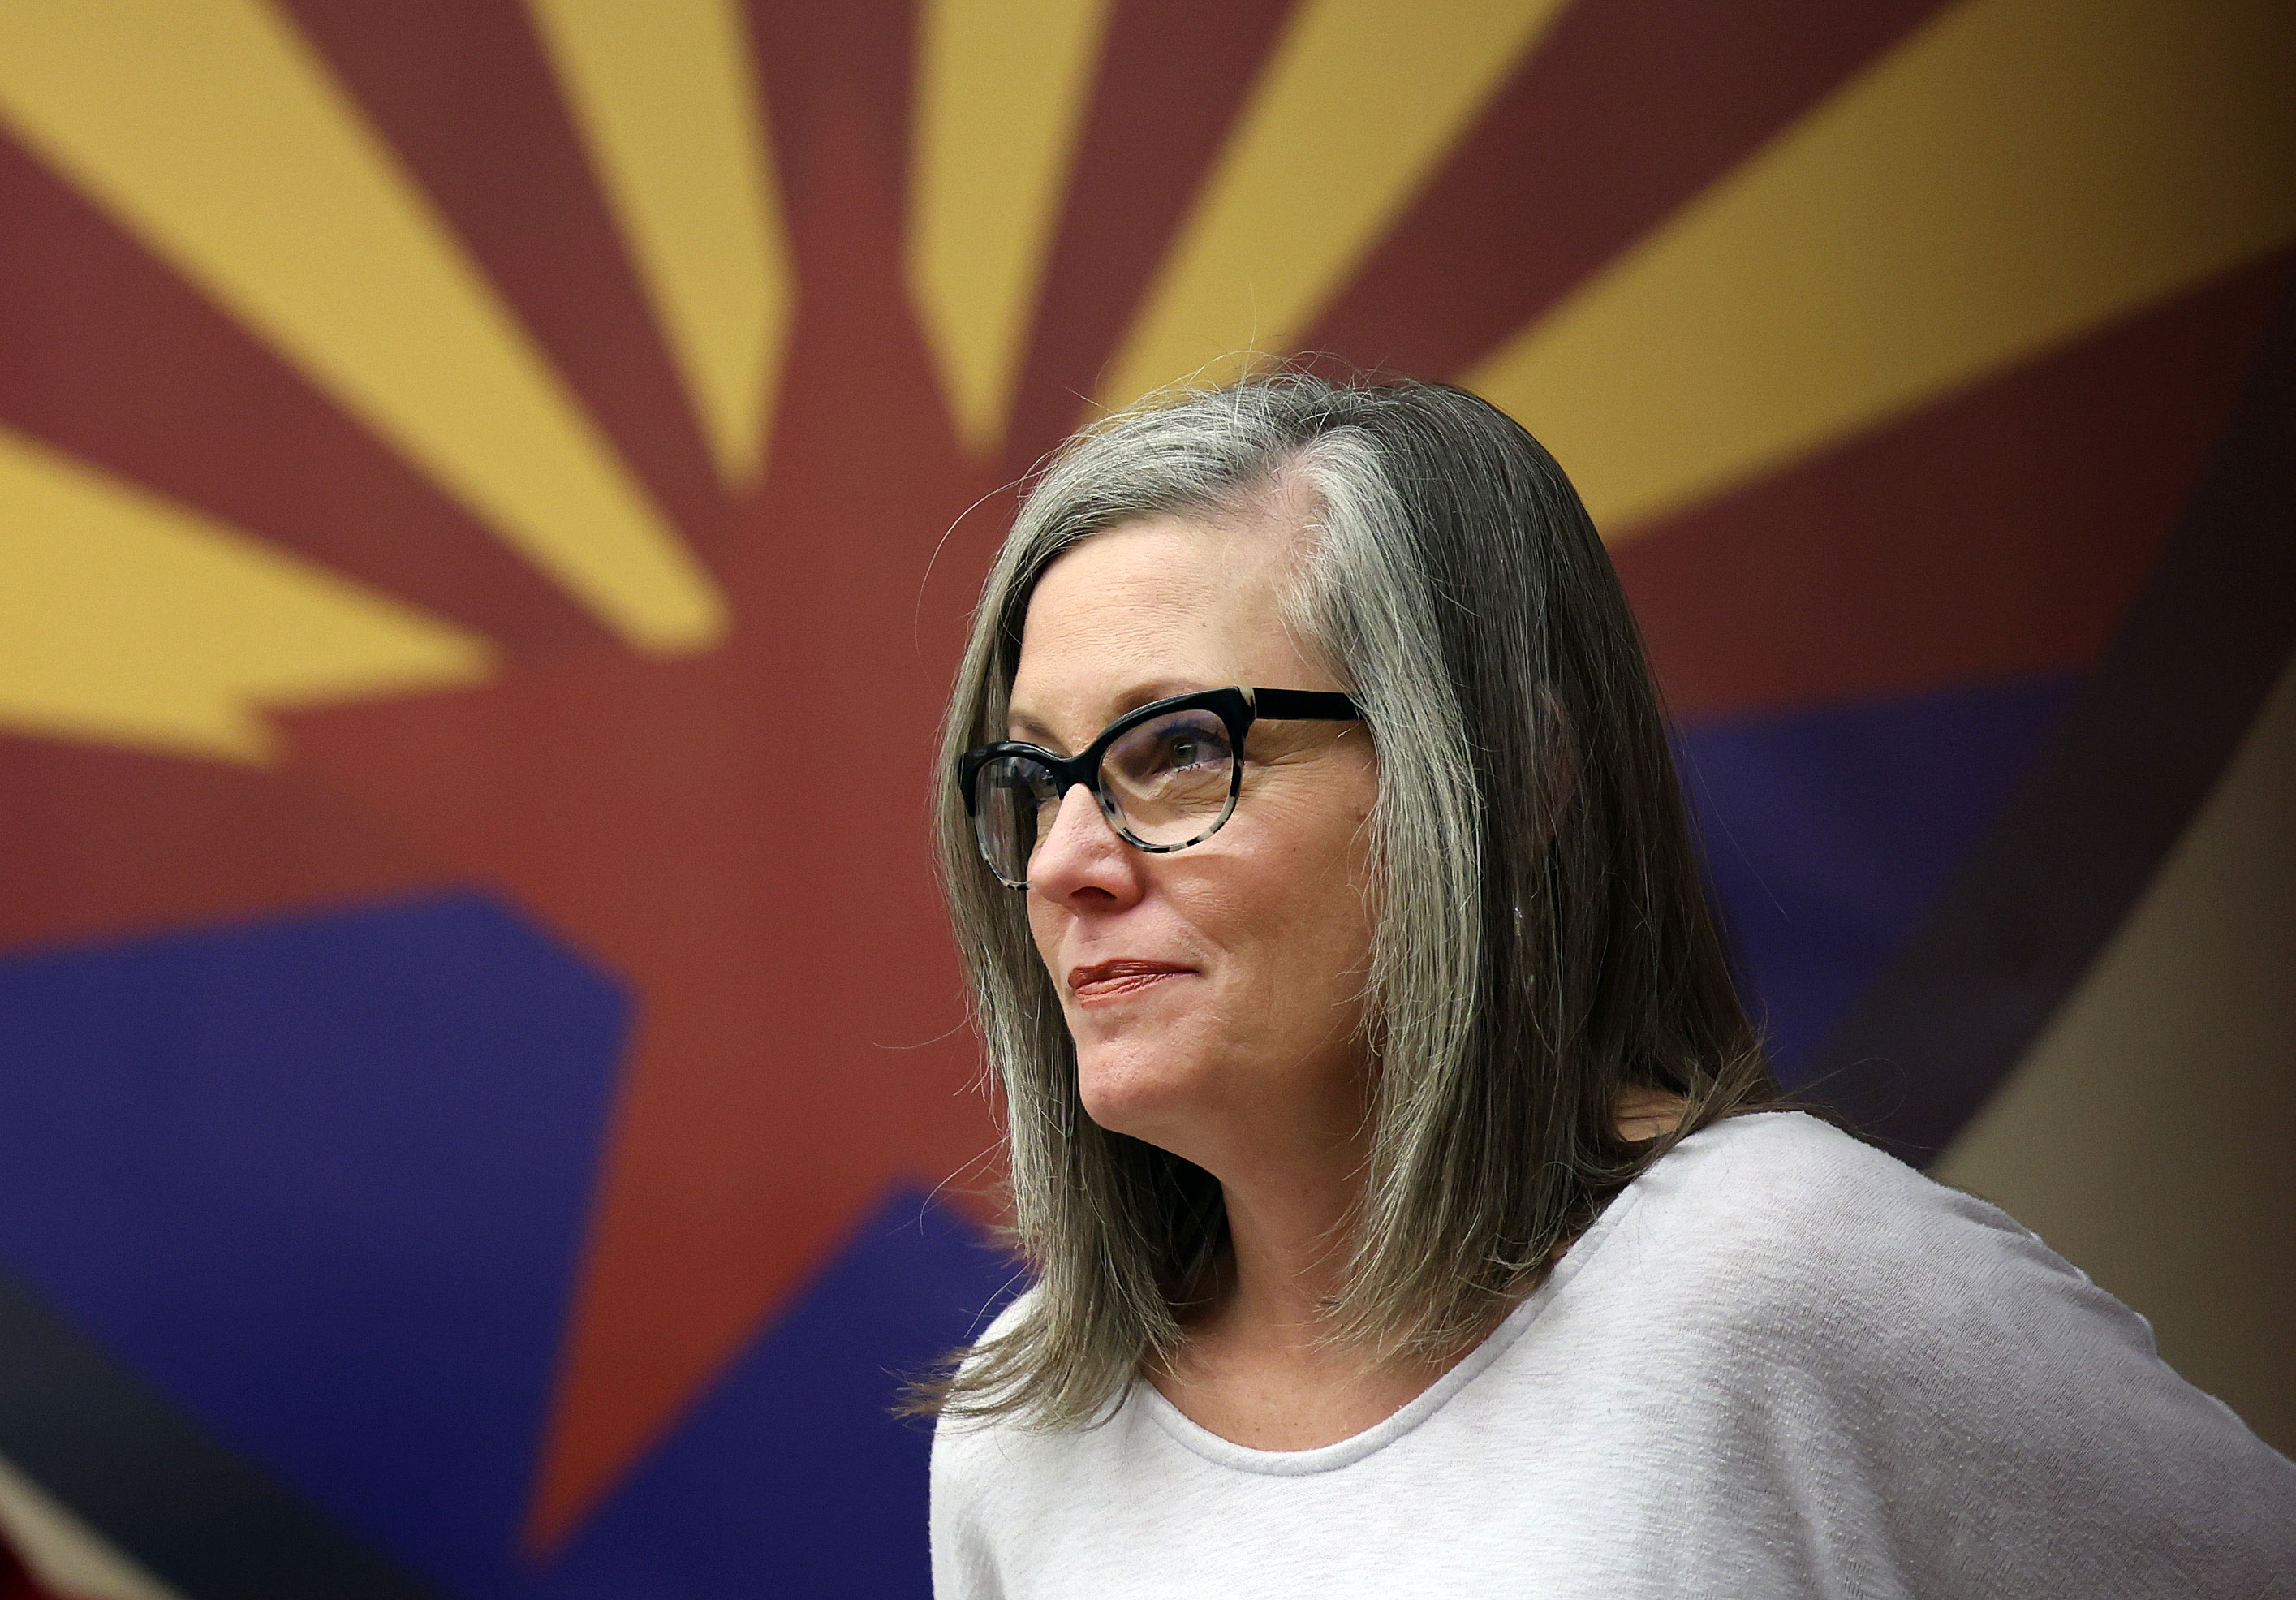 Katie Hobbs holds a campaign event in Phoenix, Arizona, on November 5.